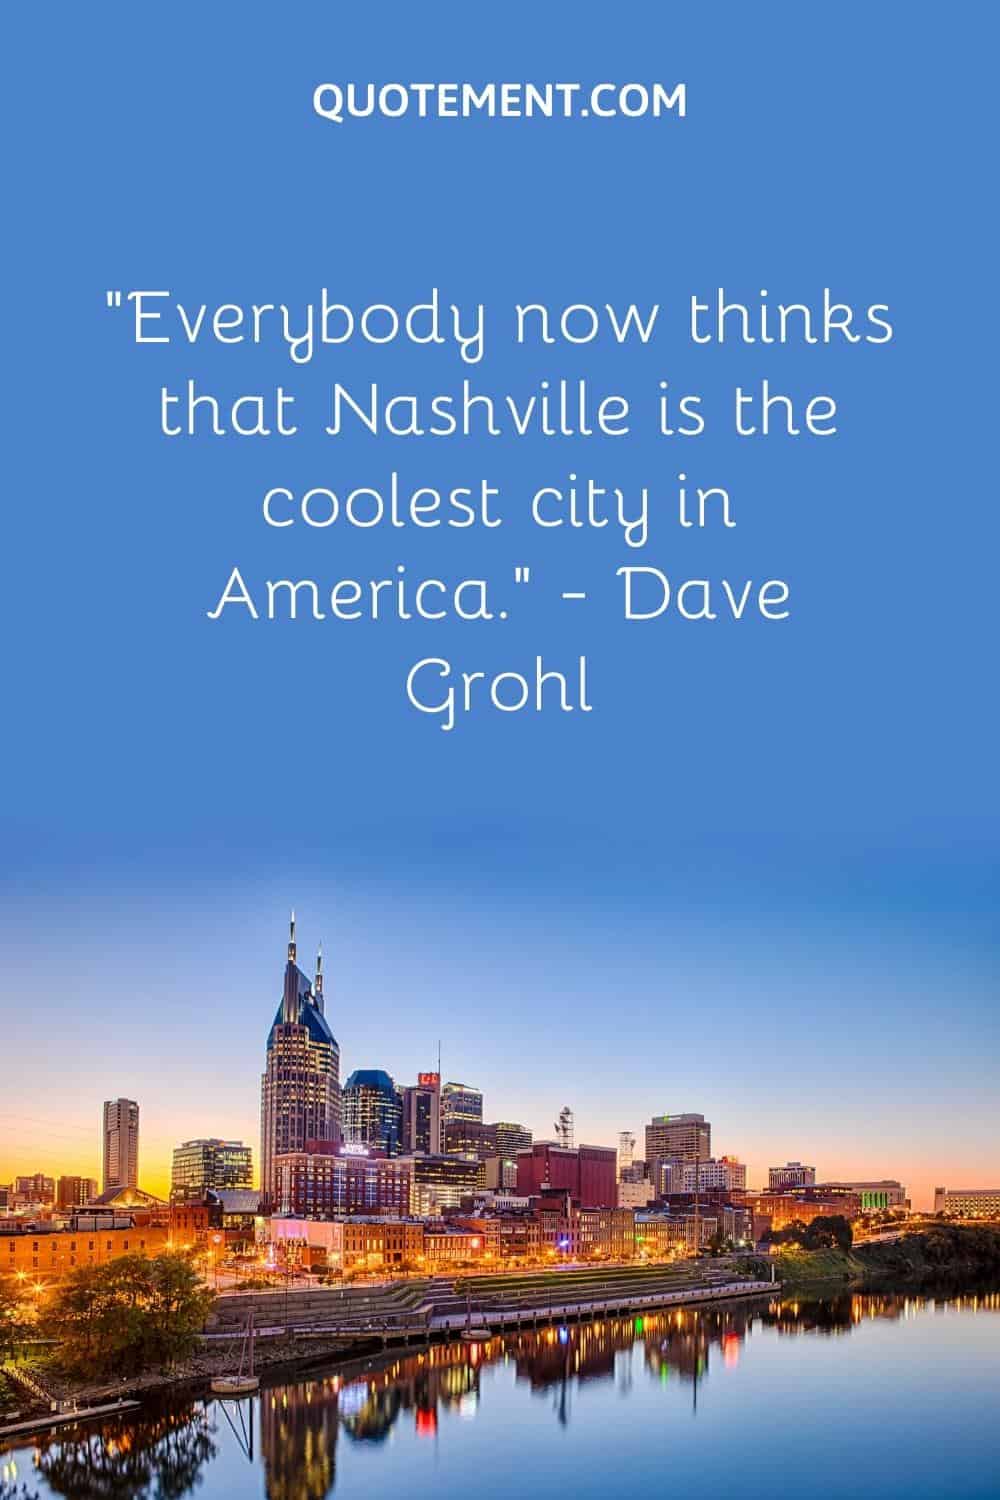 “Everybody now thinks that Nashville is the coolest city in America.” — Dave Grohl